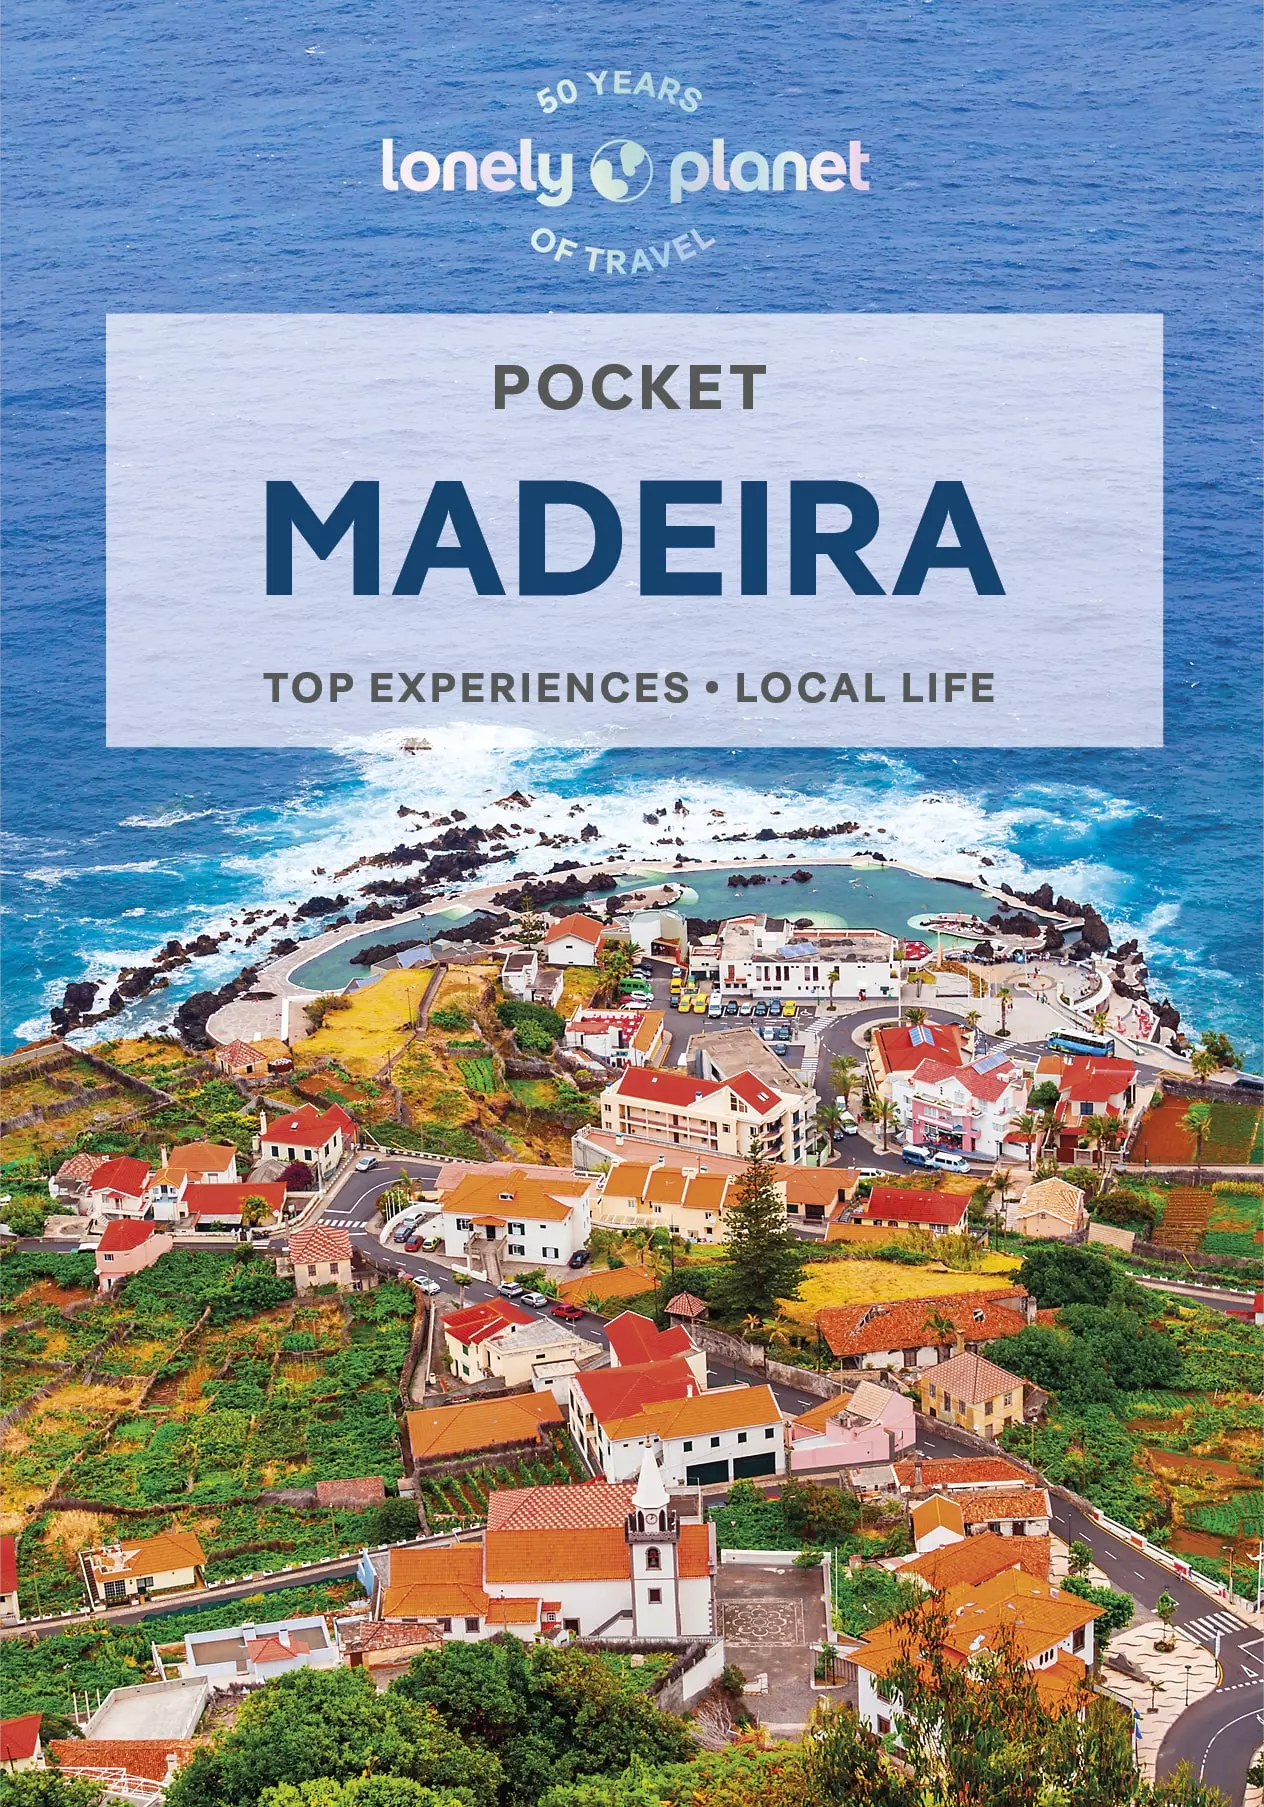 Madeira ghid turistic Lonely Planet (engleză)